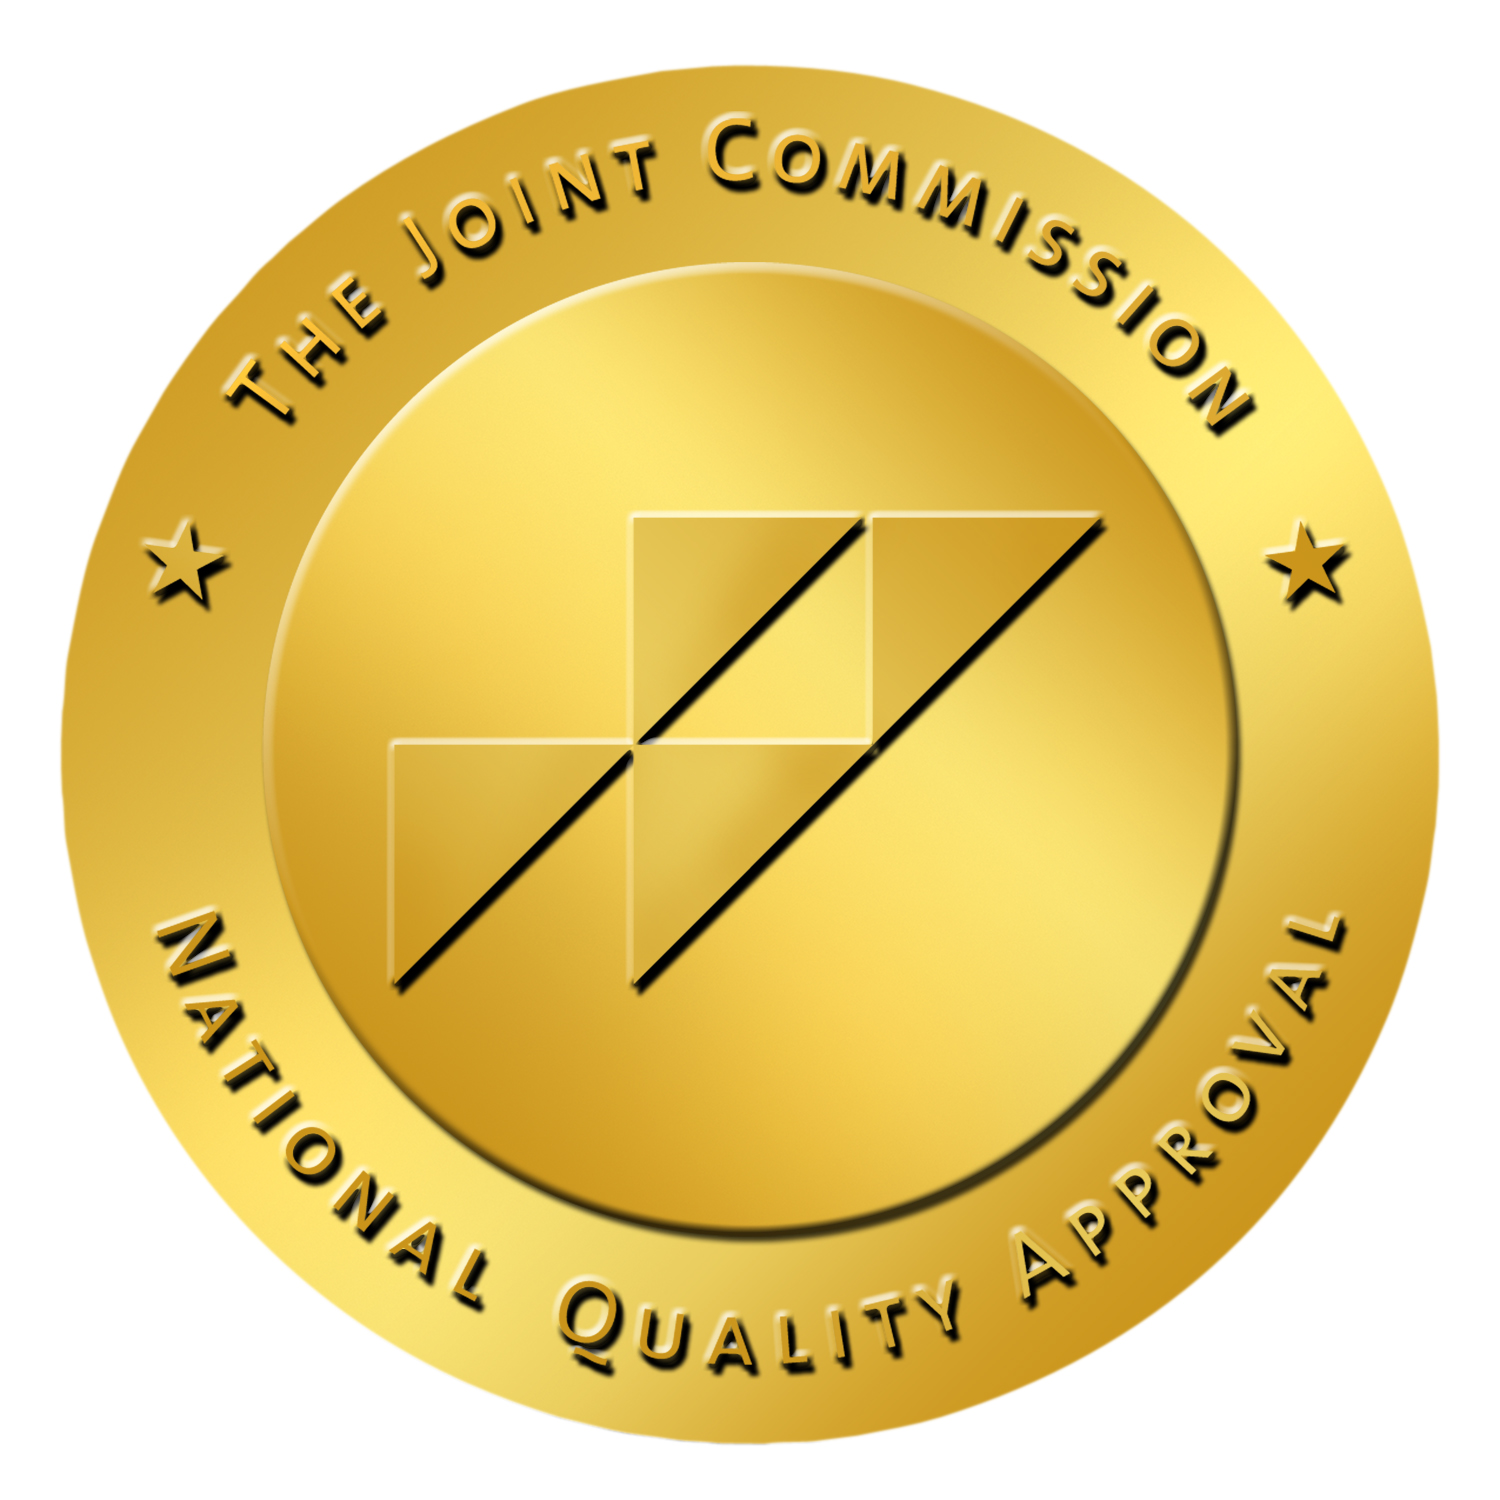 The Joint Commission National Quality Approval seal.